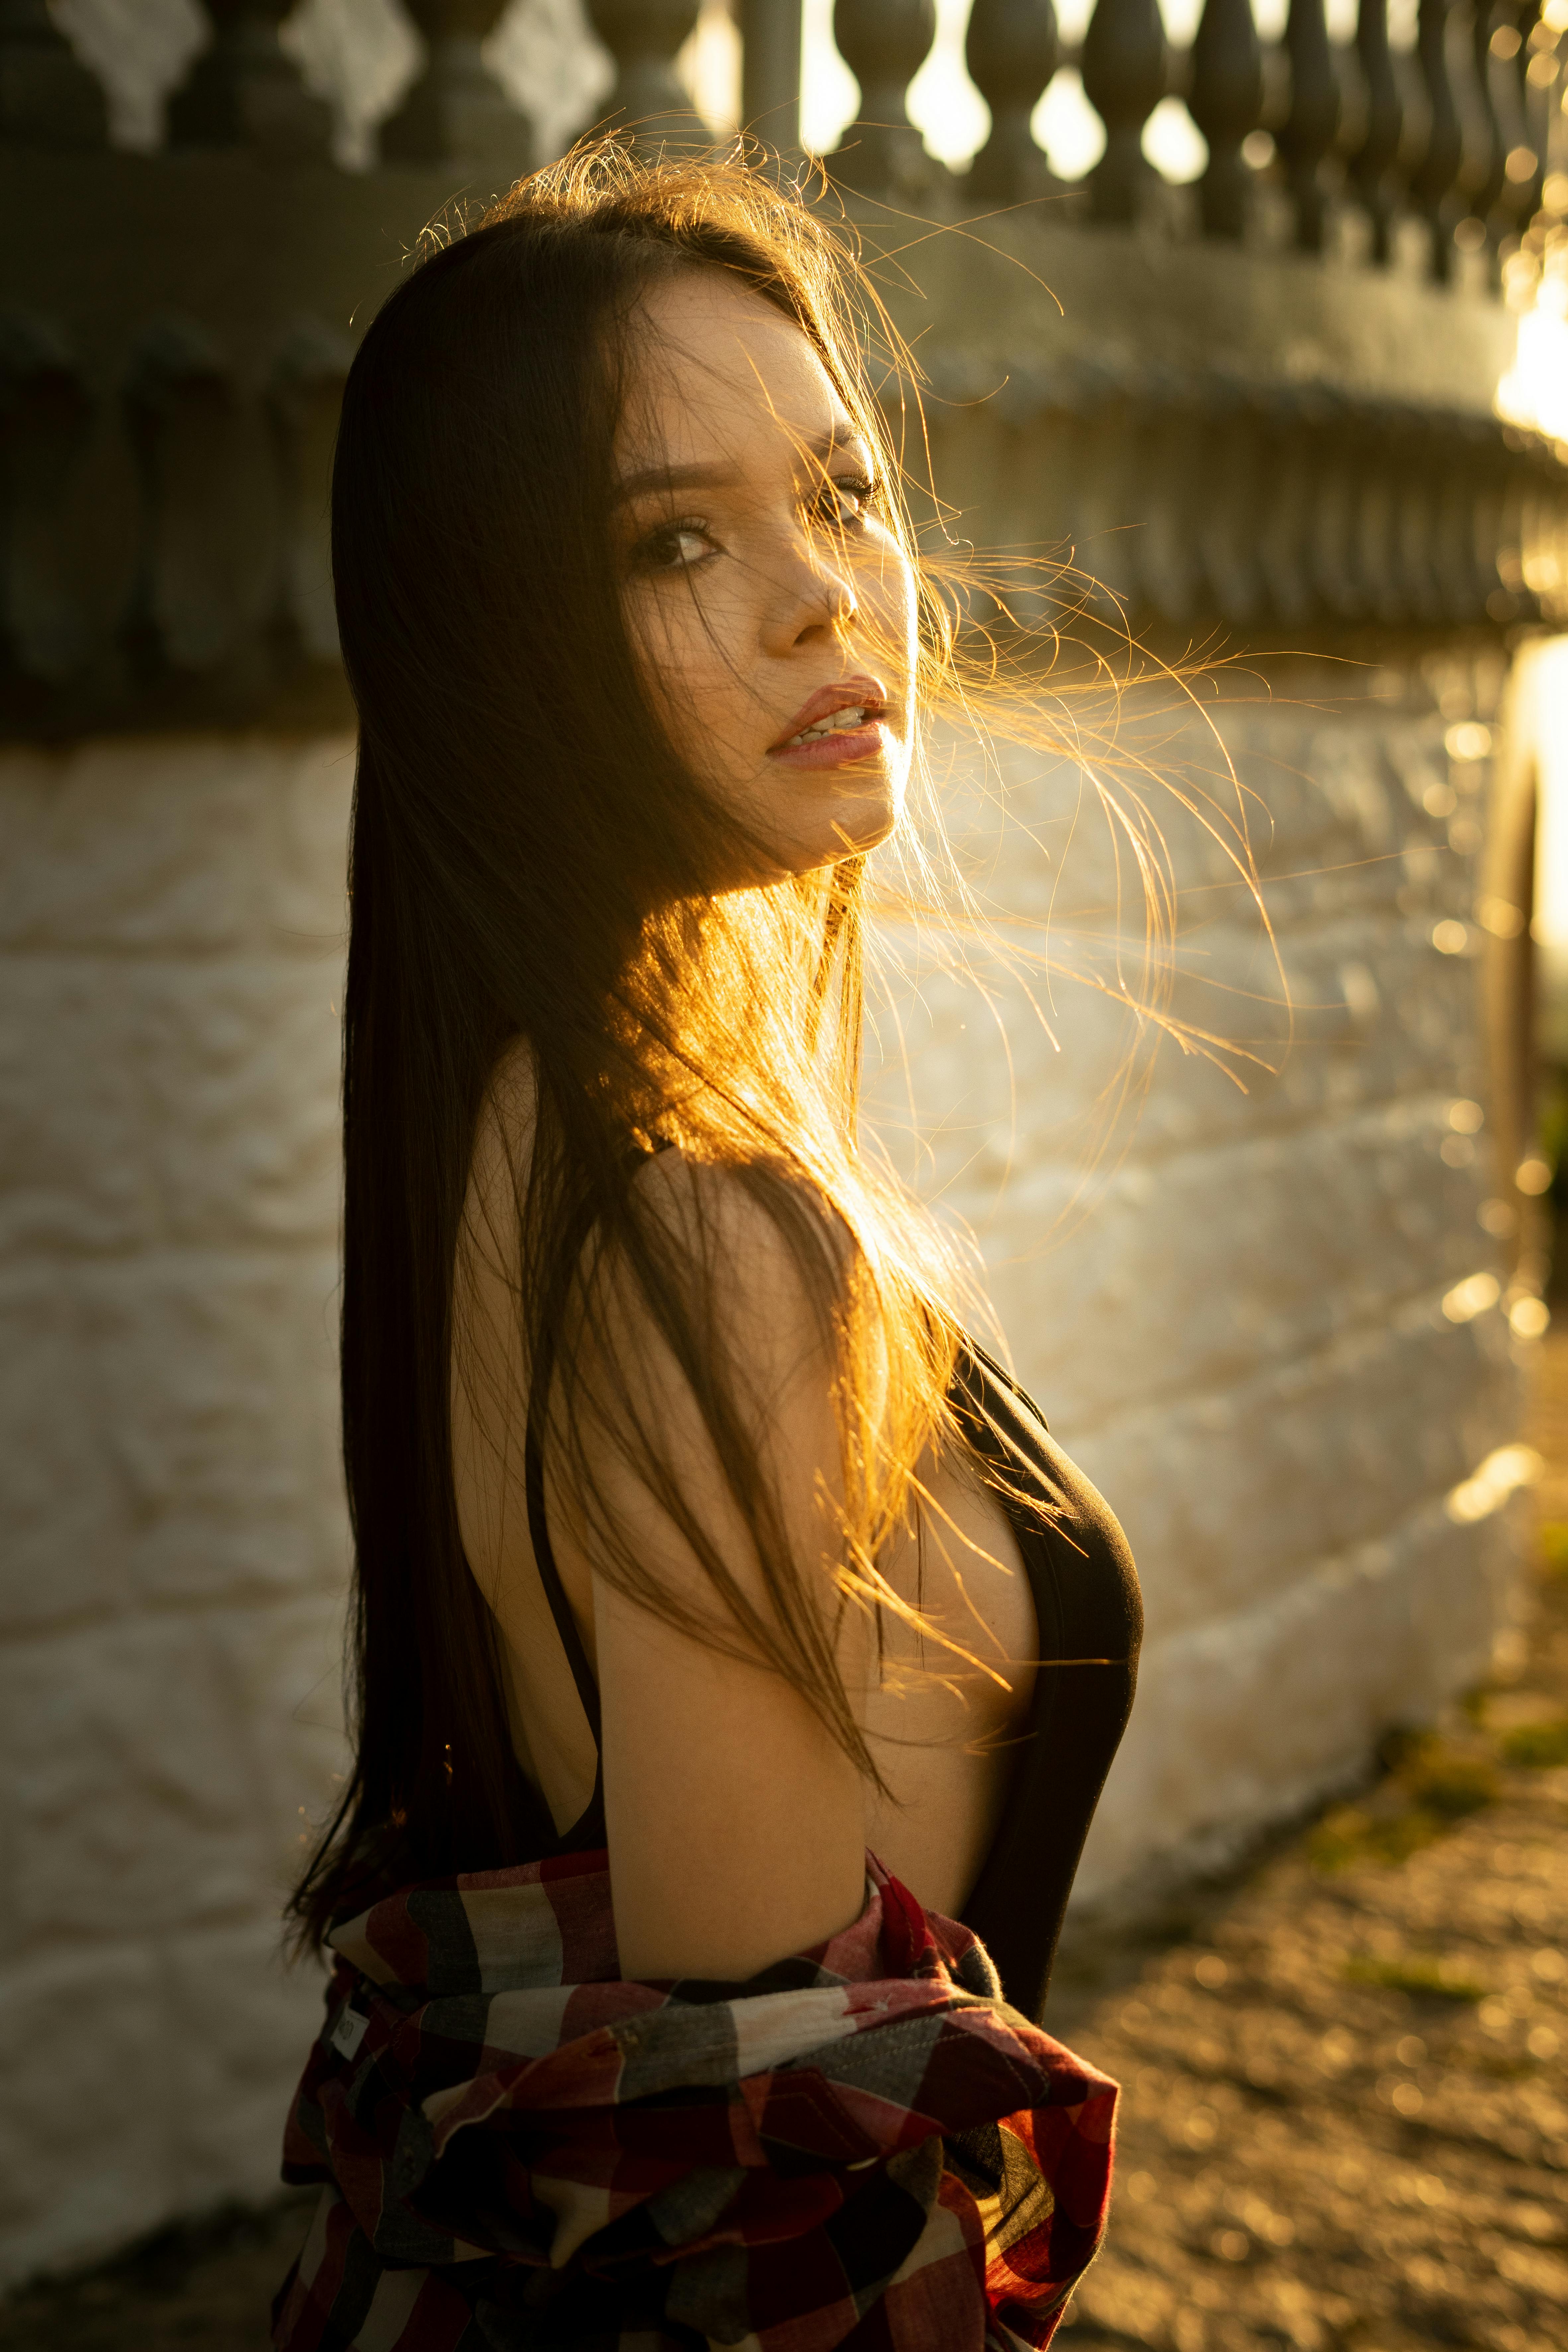 Download A Girl With Long Black Hair Looking Up